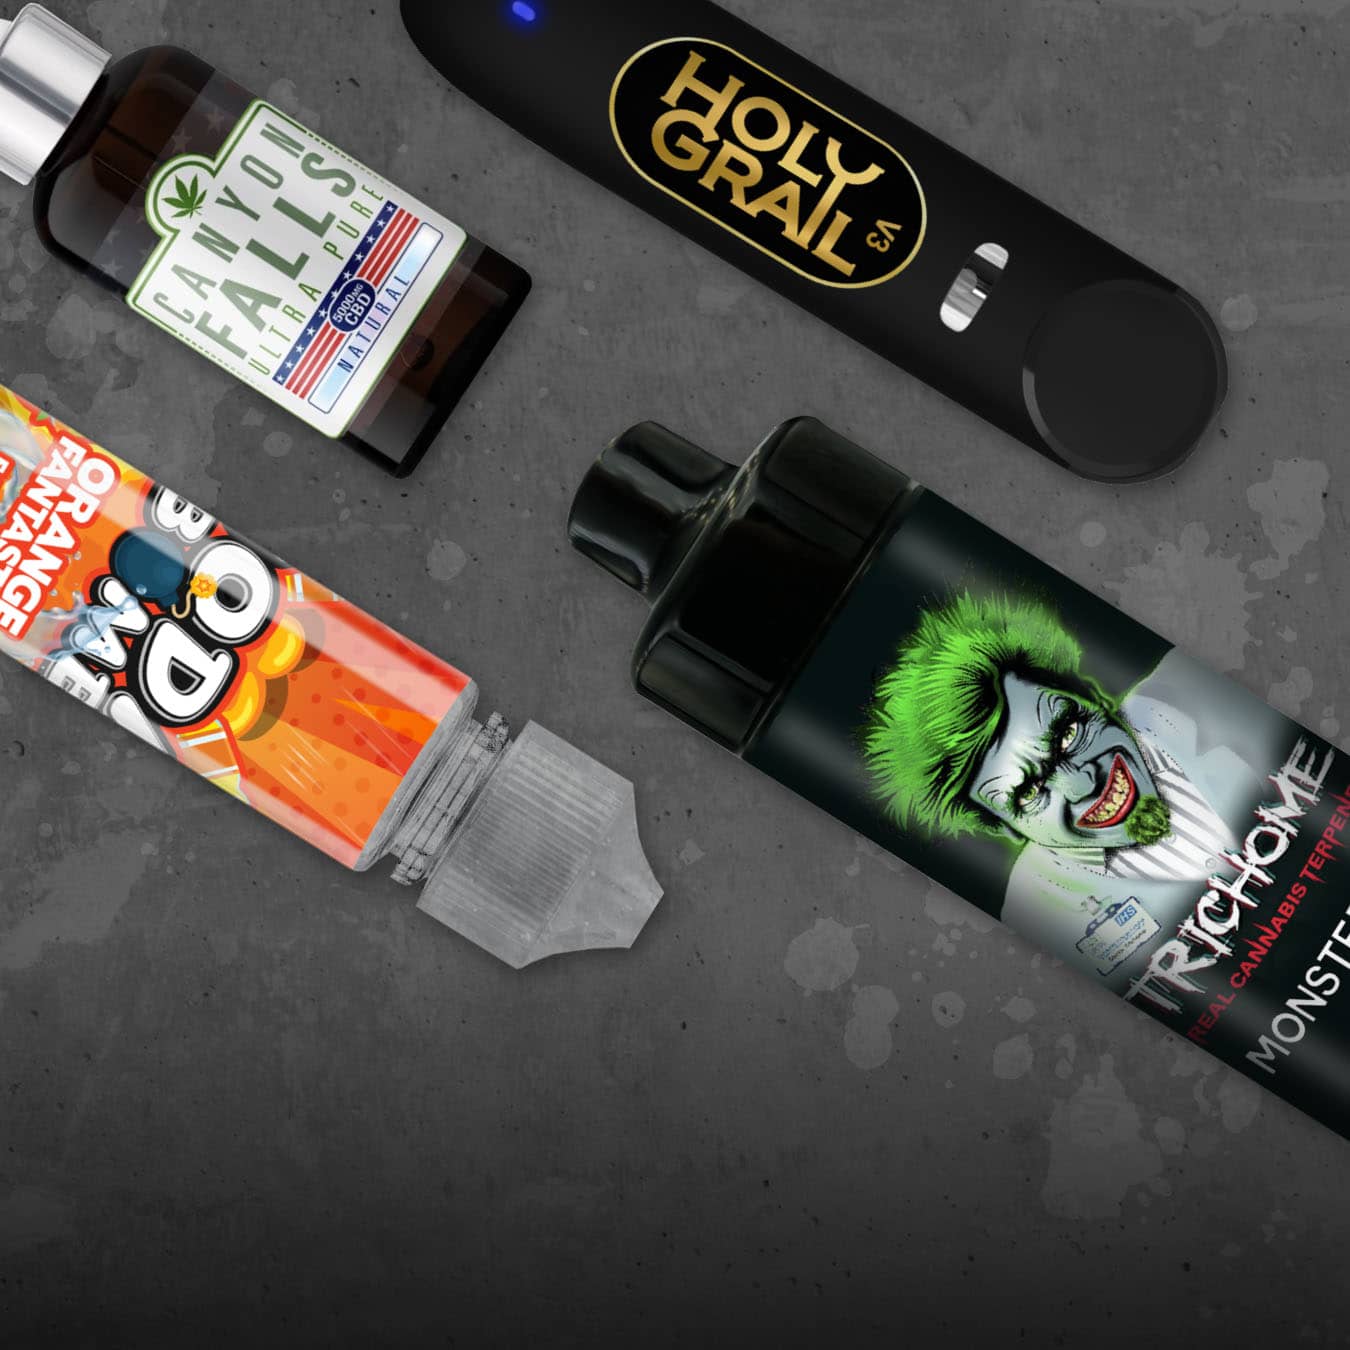 UP TO 50% OFF CBD PRODUCTS